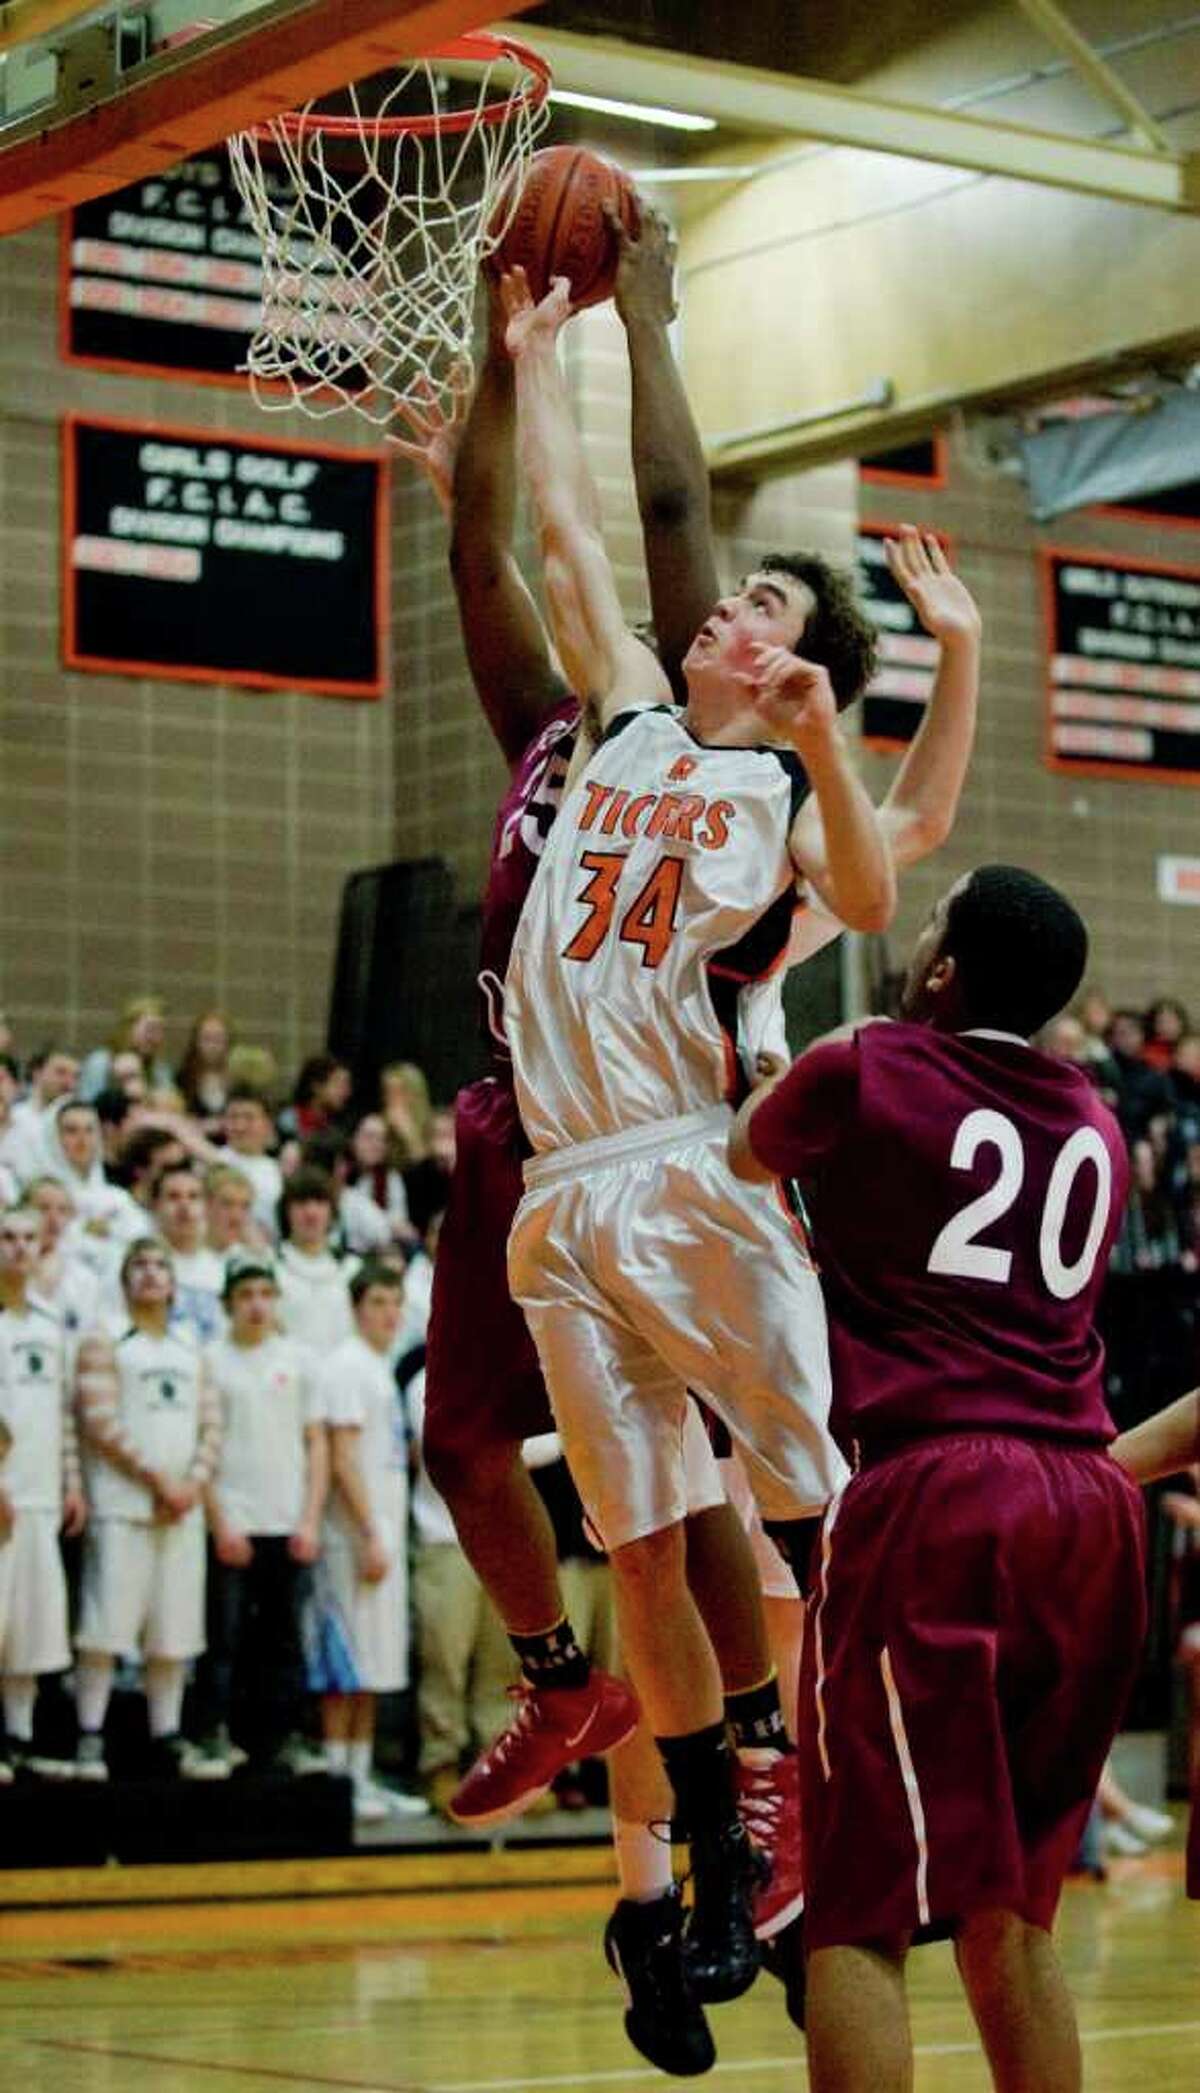 Ridgefield High School's Seth von Kuhn goes up for a shot against Bulkeley High School in a game played at Ridgefield. Tuesday, Mar. 6, 2012